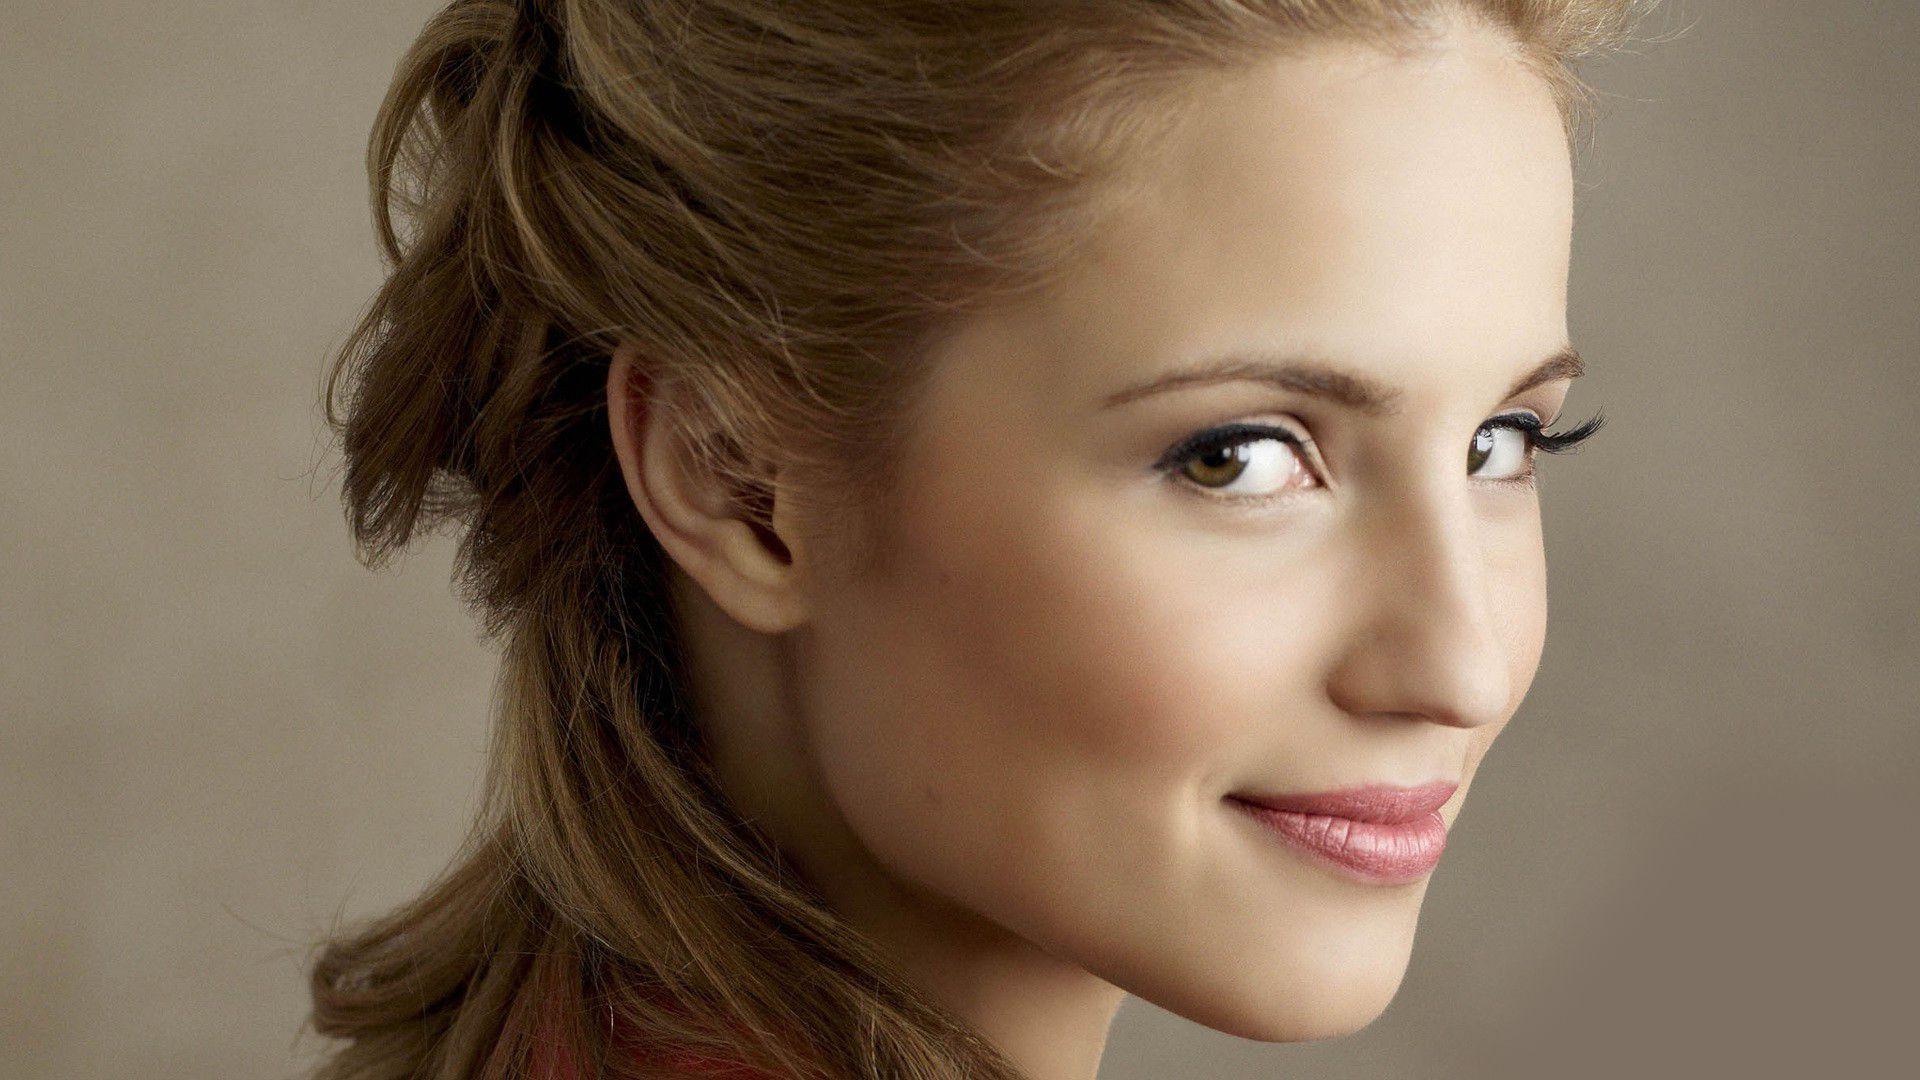 Dianna Agron Wallpaper High Quality